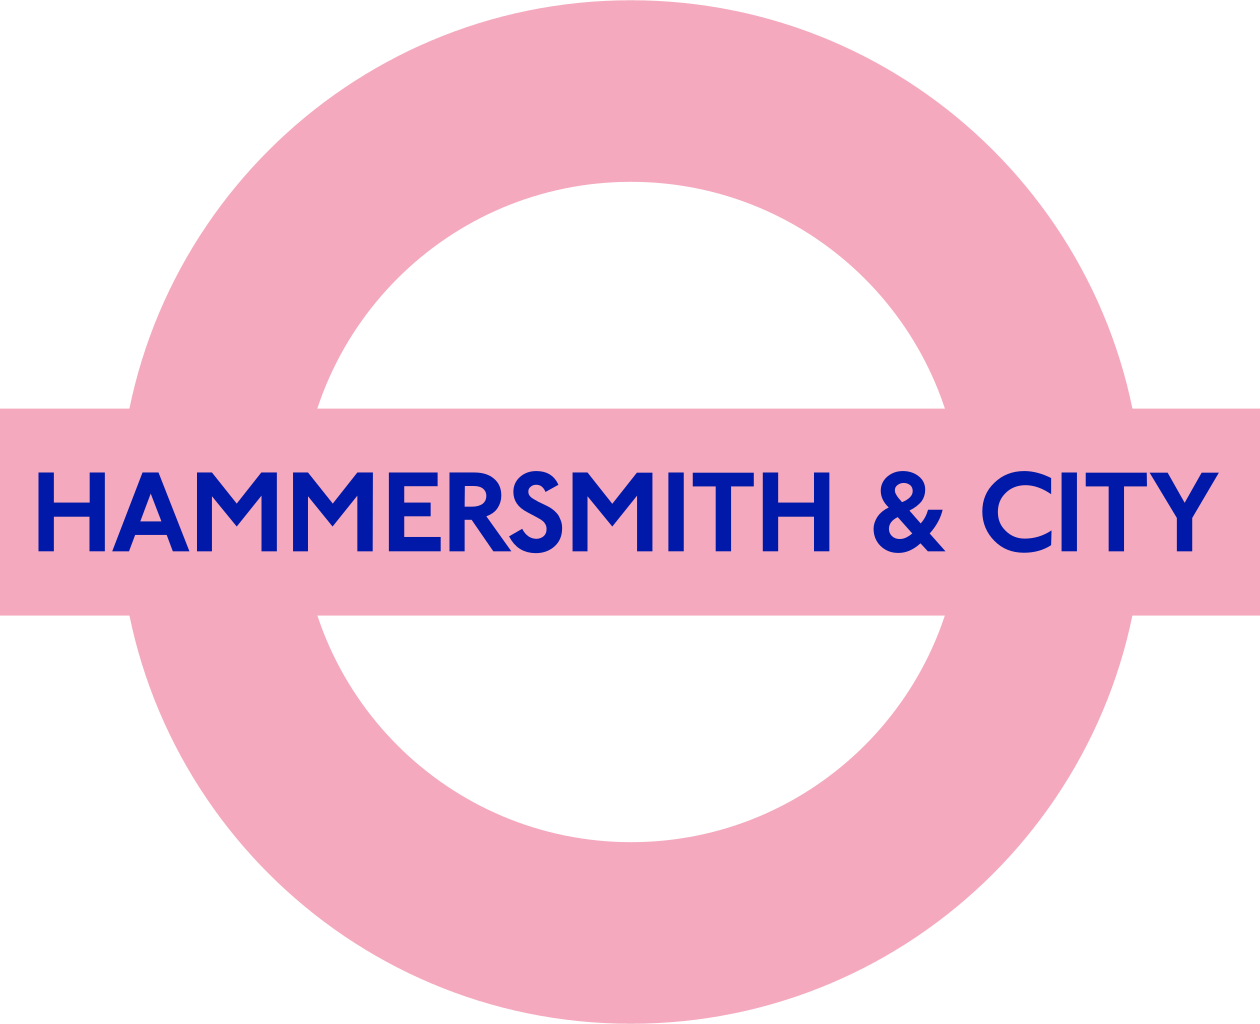 london tube lines ranked - hammersmith and city